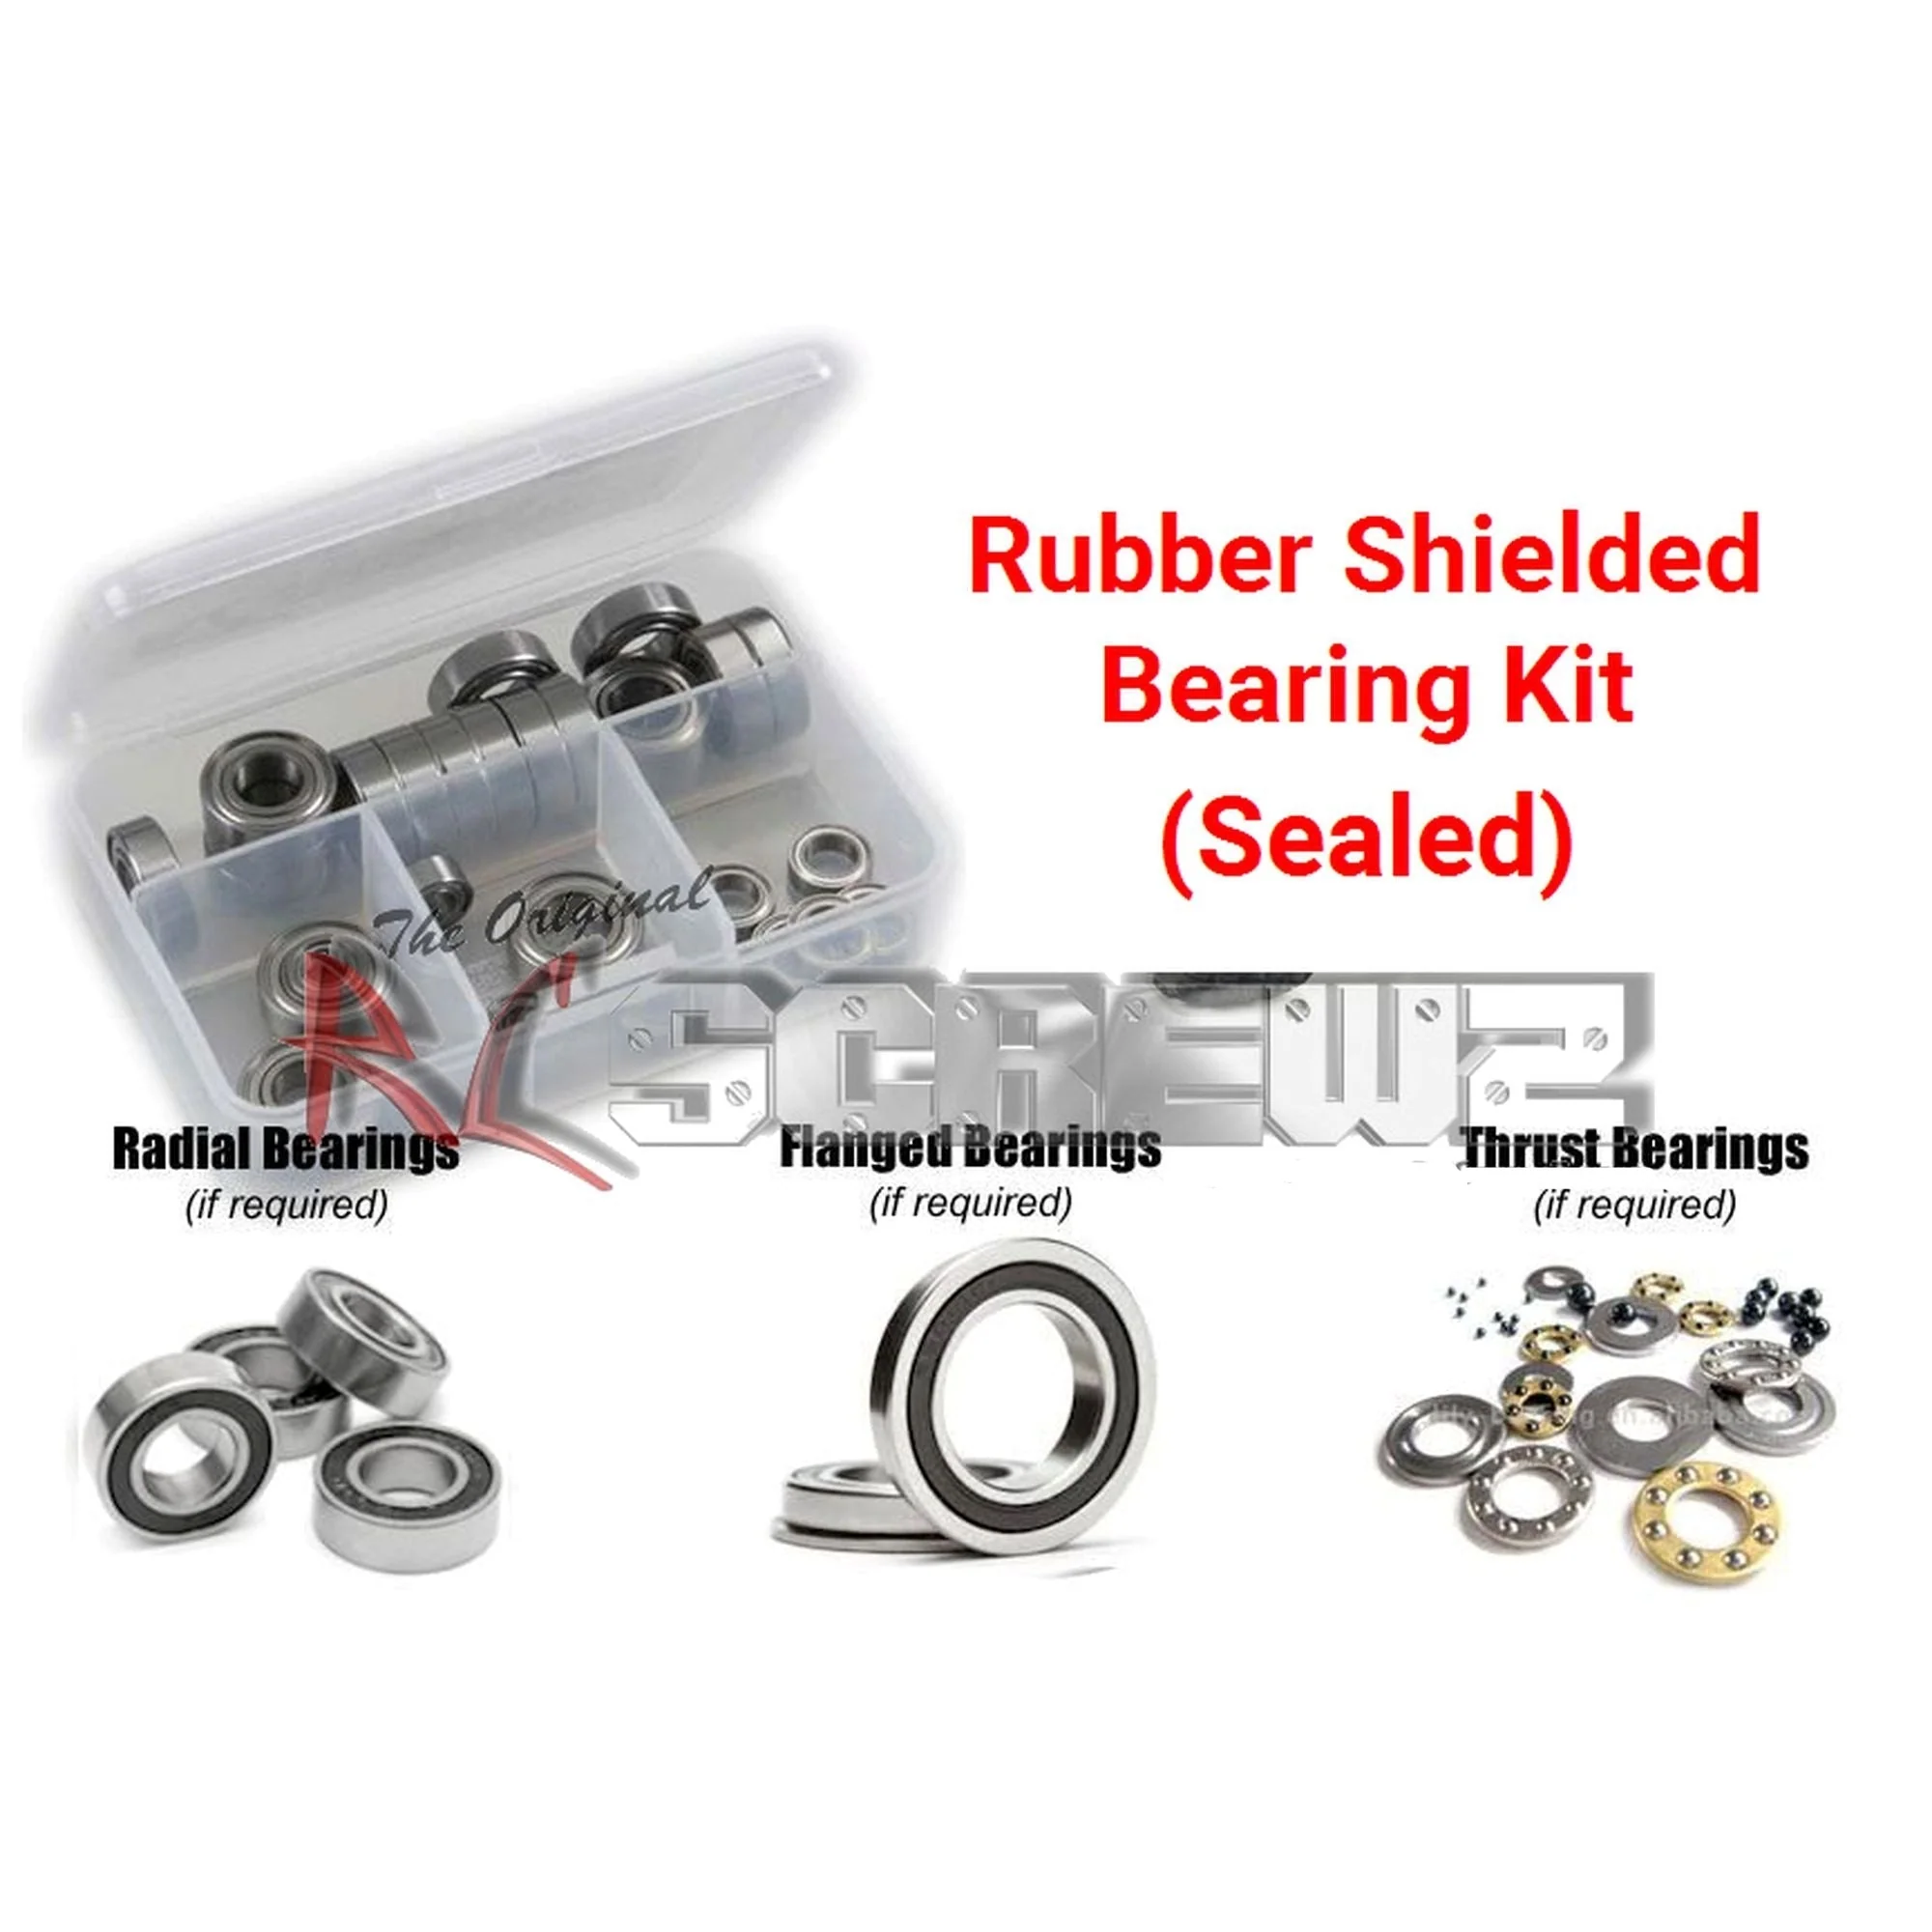 RCScrewZ Rubber Shielded Bearing Kit asc115r for Associated RC10B6.3/D #90030 - Picture 1 of 12